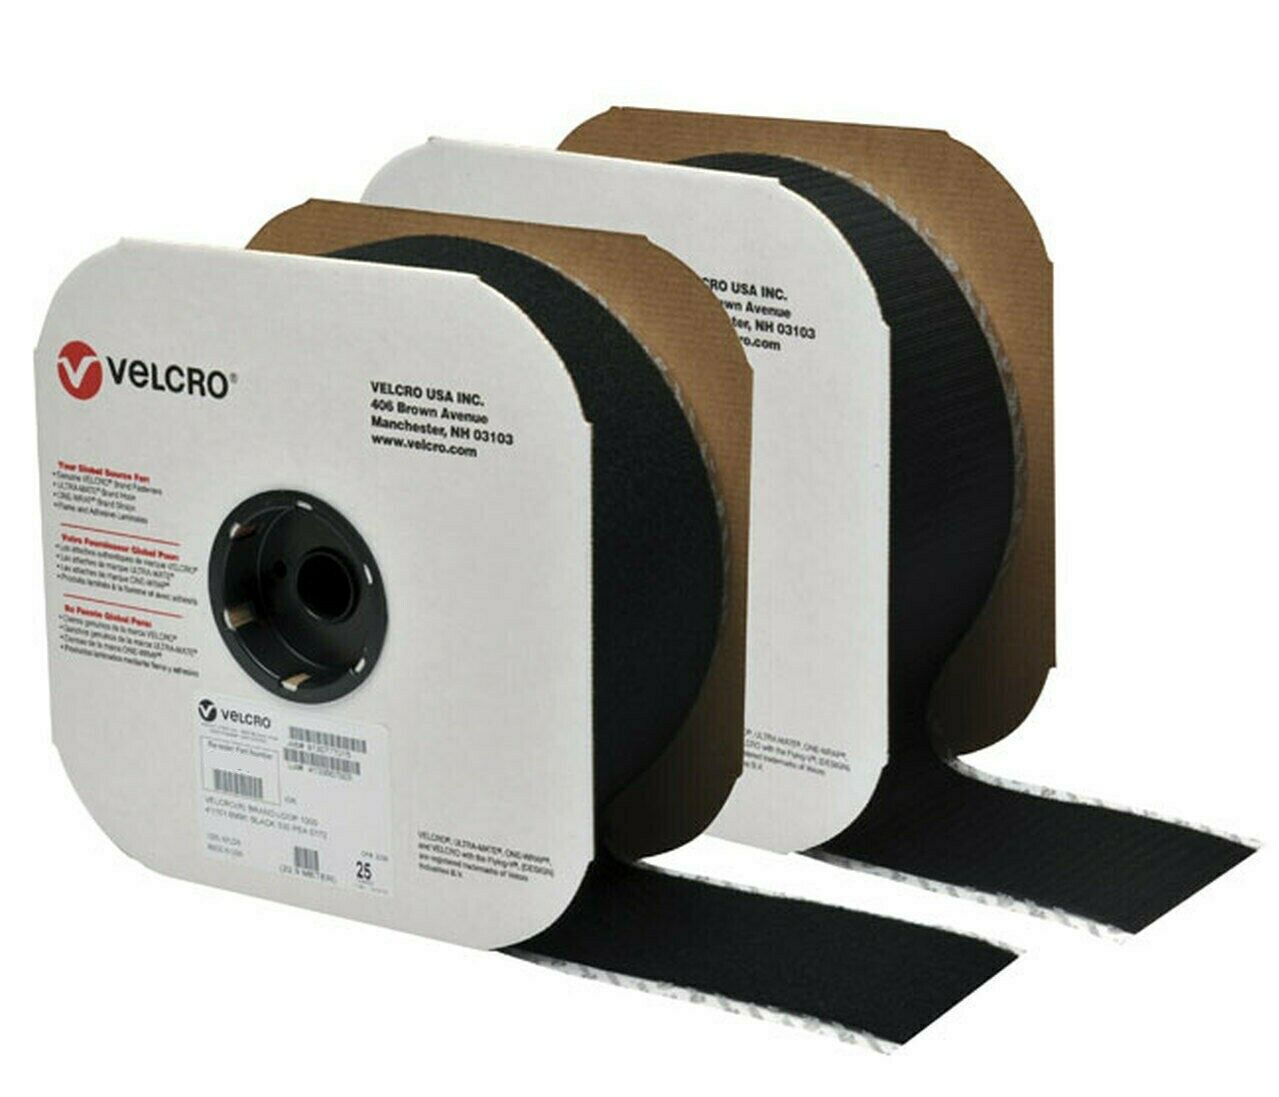 4" Wide Velcro® Brand High Tack Self Adhesive Tape Strip Set -buy The Foot-